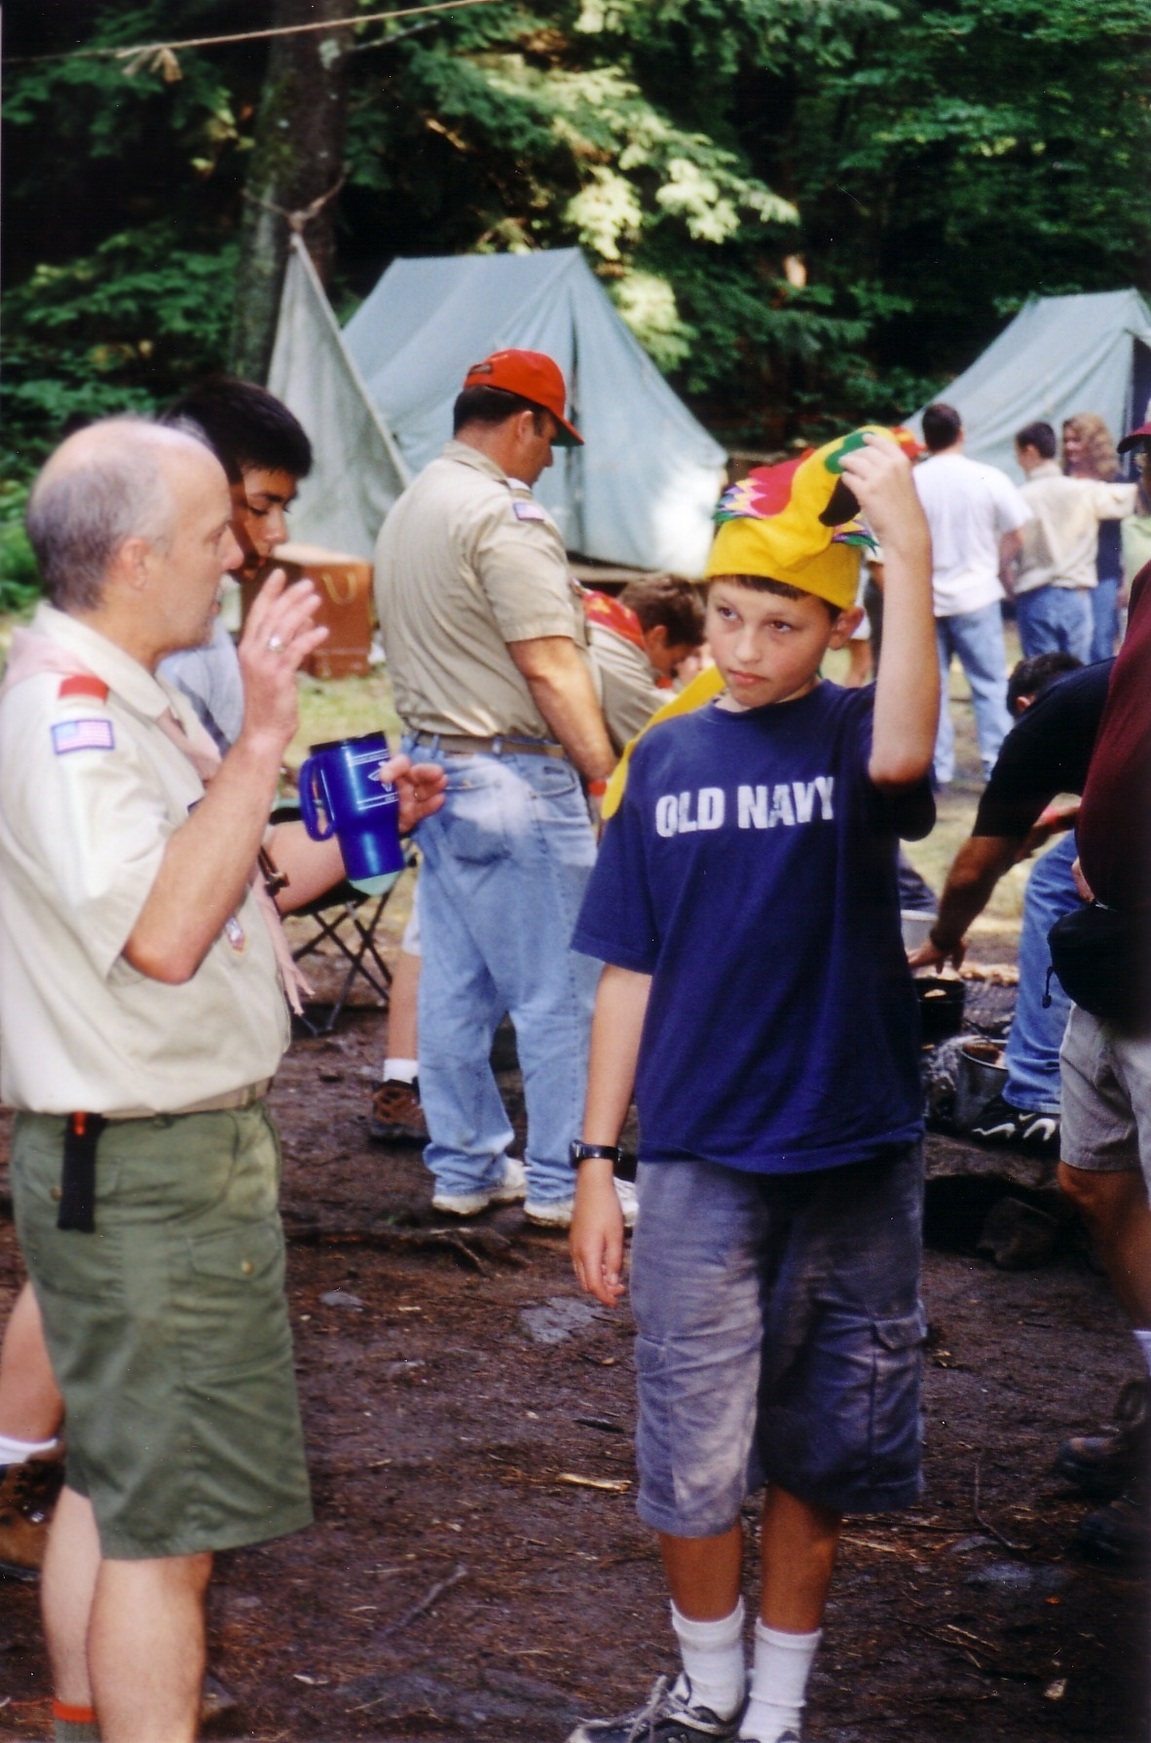 Scoutmaster McKnight talking to Seth Hendrick, who is wearing a colorful felt parrot hat.